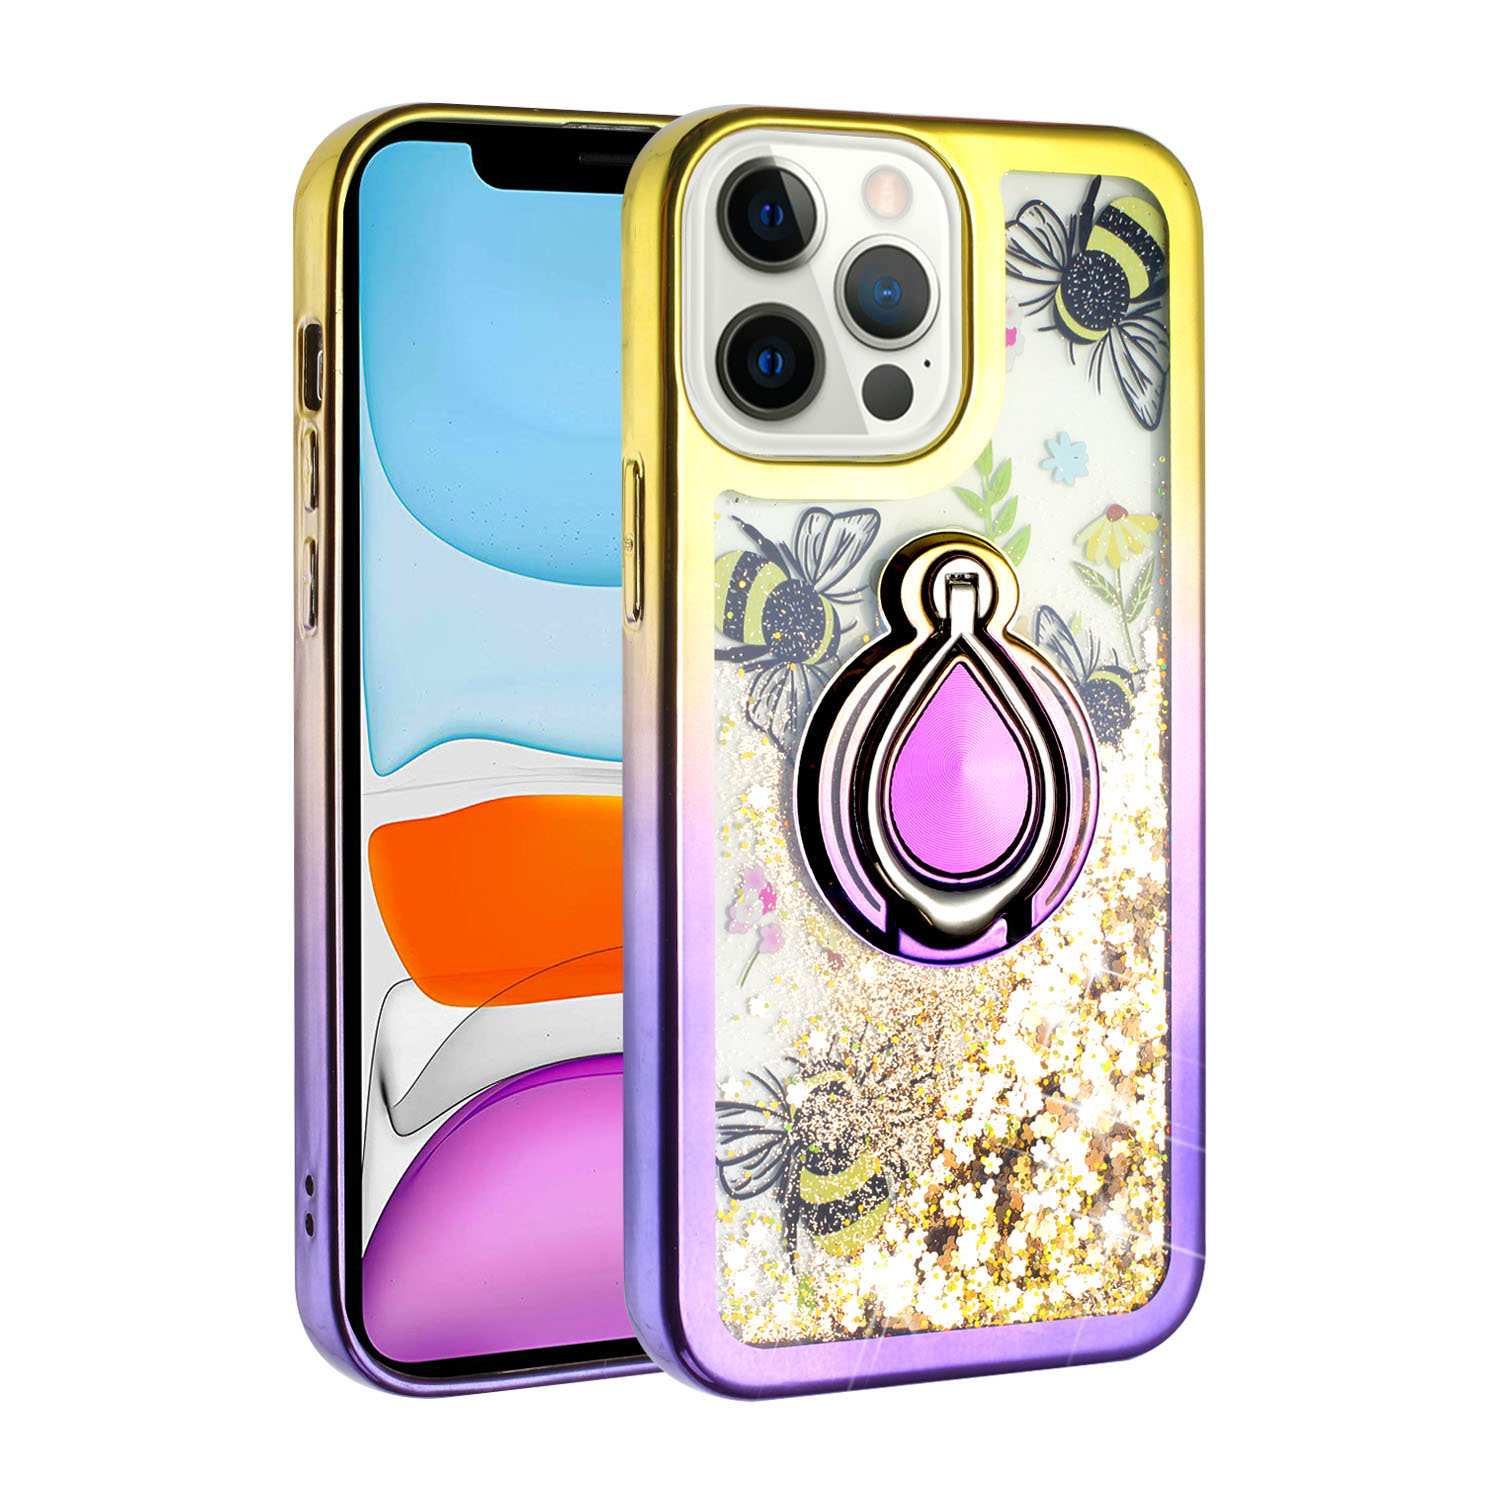 Star Dust Liquid Armor RING Stand Hybrid Case for Apple iPhone 13 Pro [6.1] (Gold / Purple)